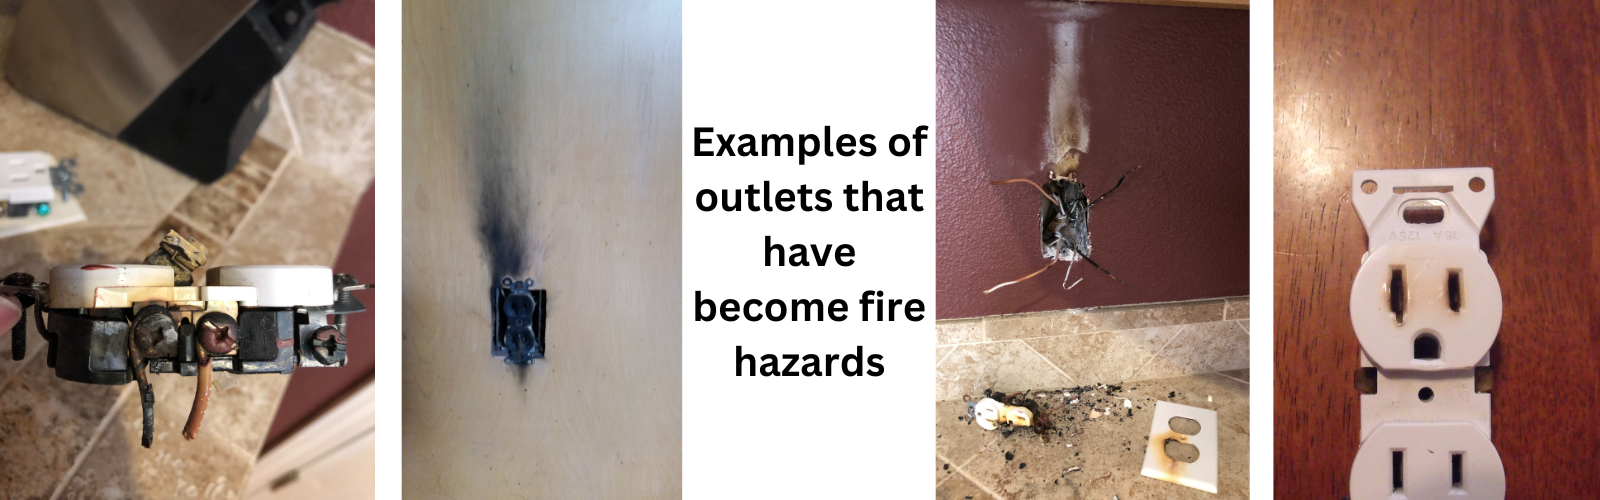 Examples of outlets that have become fire hazards